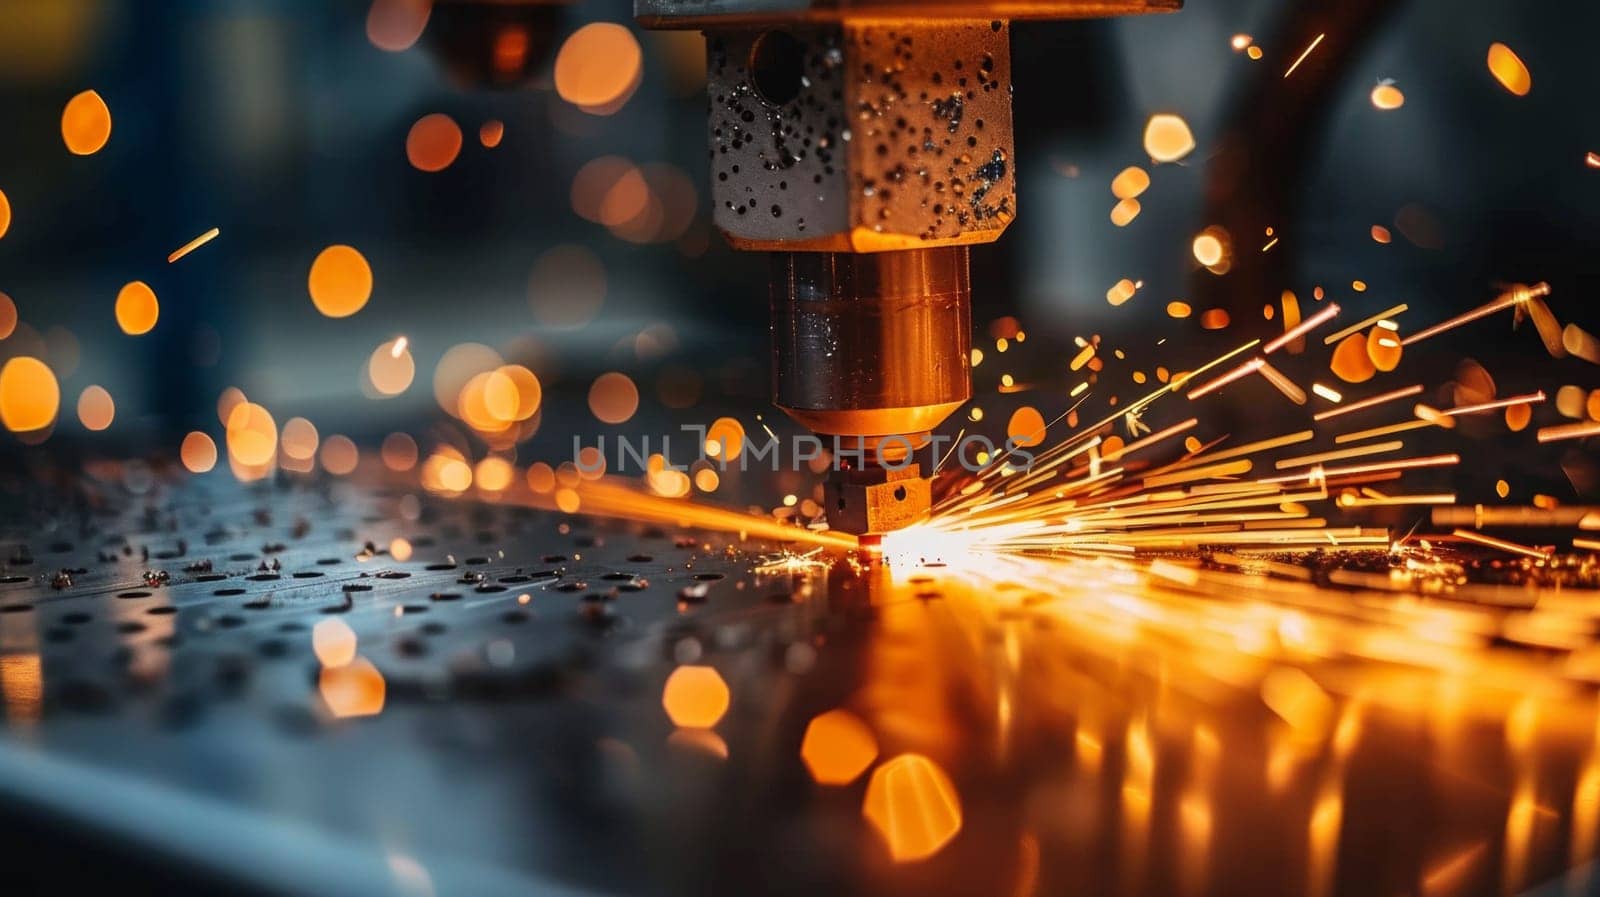 A machine is cutting metal with sparks coming out of it